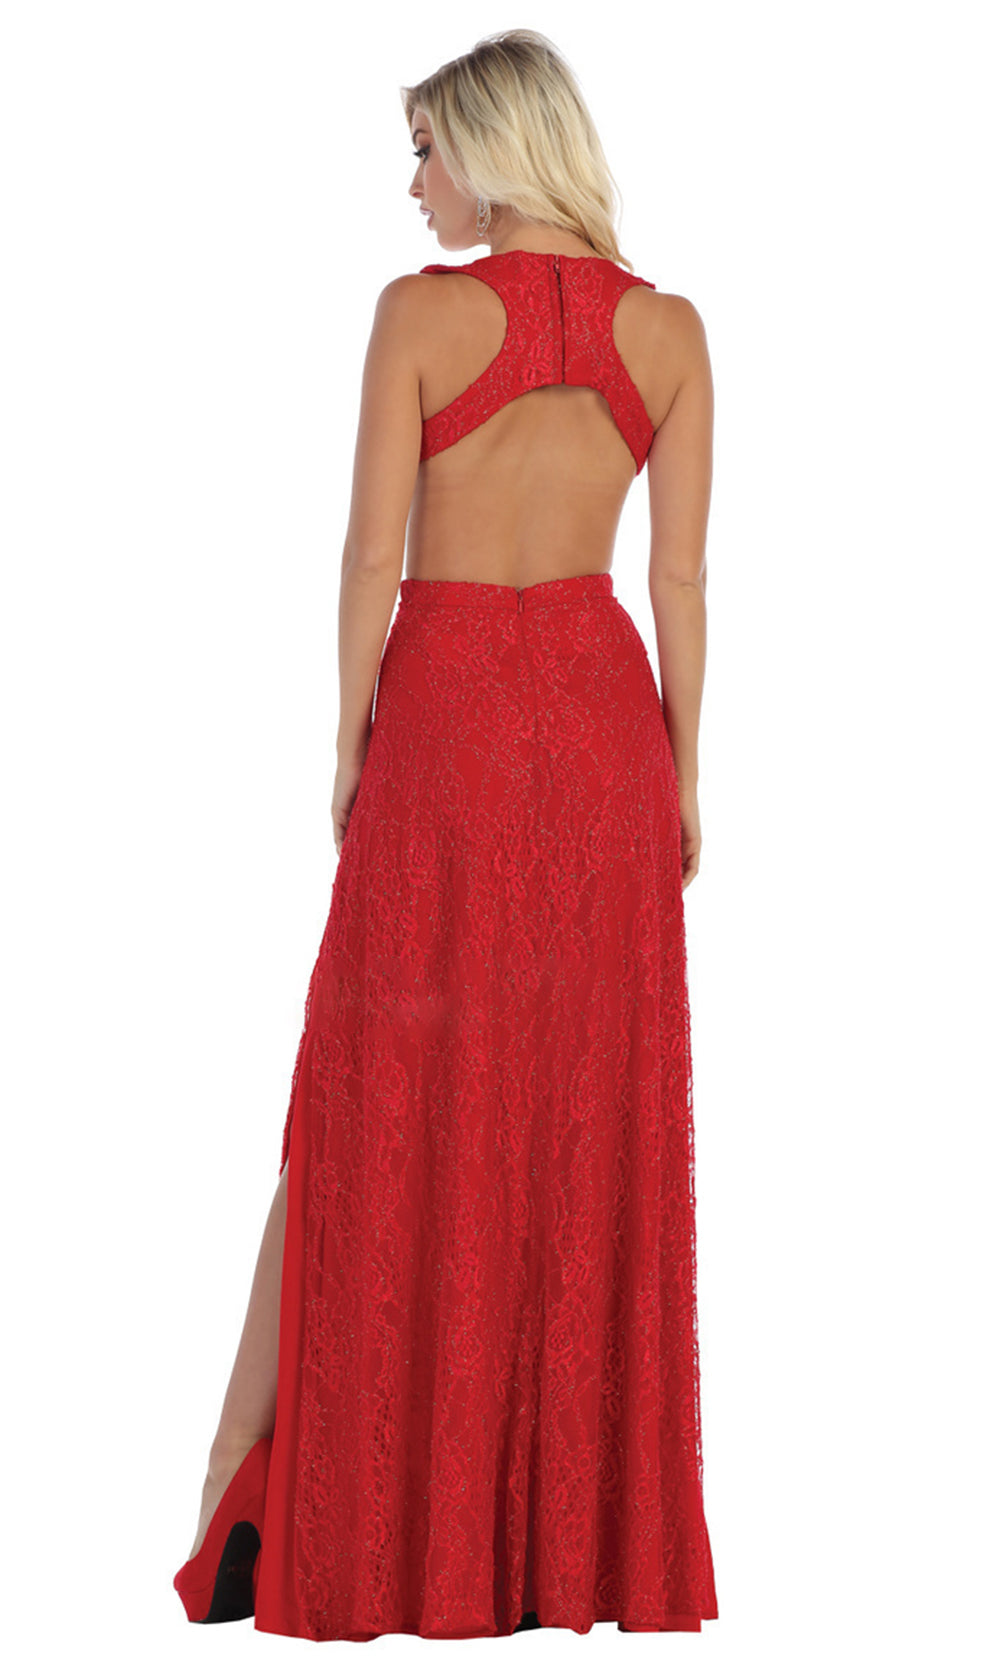 May Queen - RQ7736 Sleek And Sexy Double Slit Dress In Red